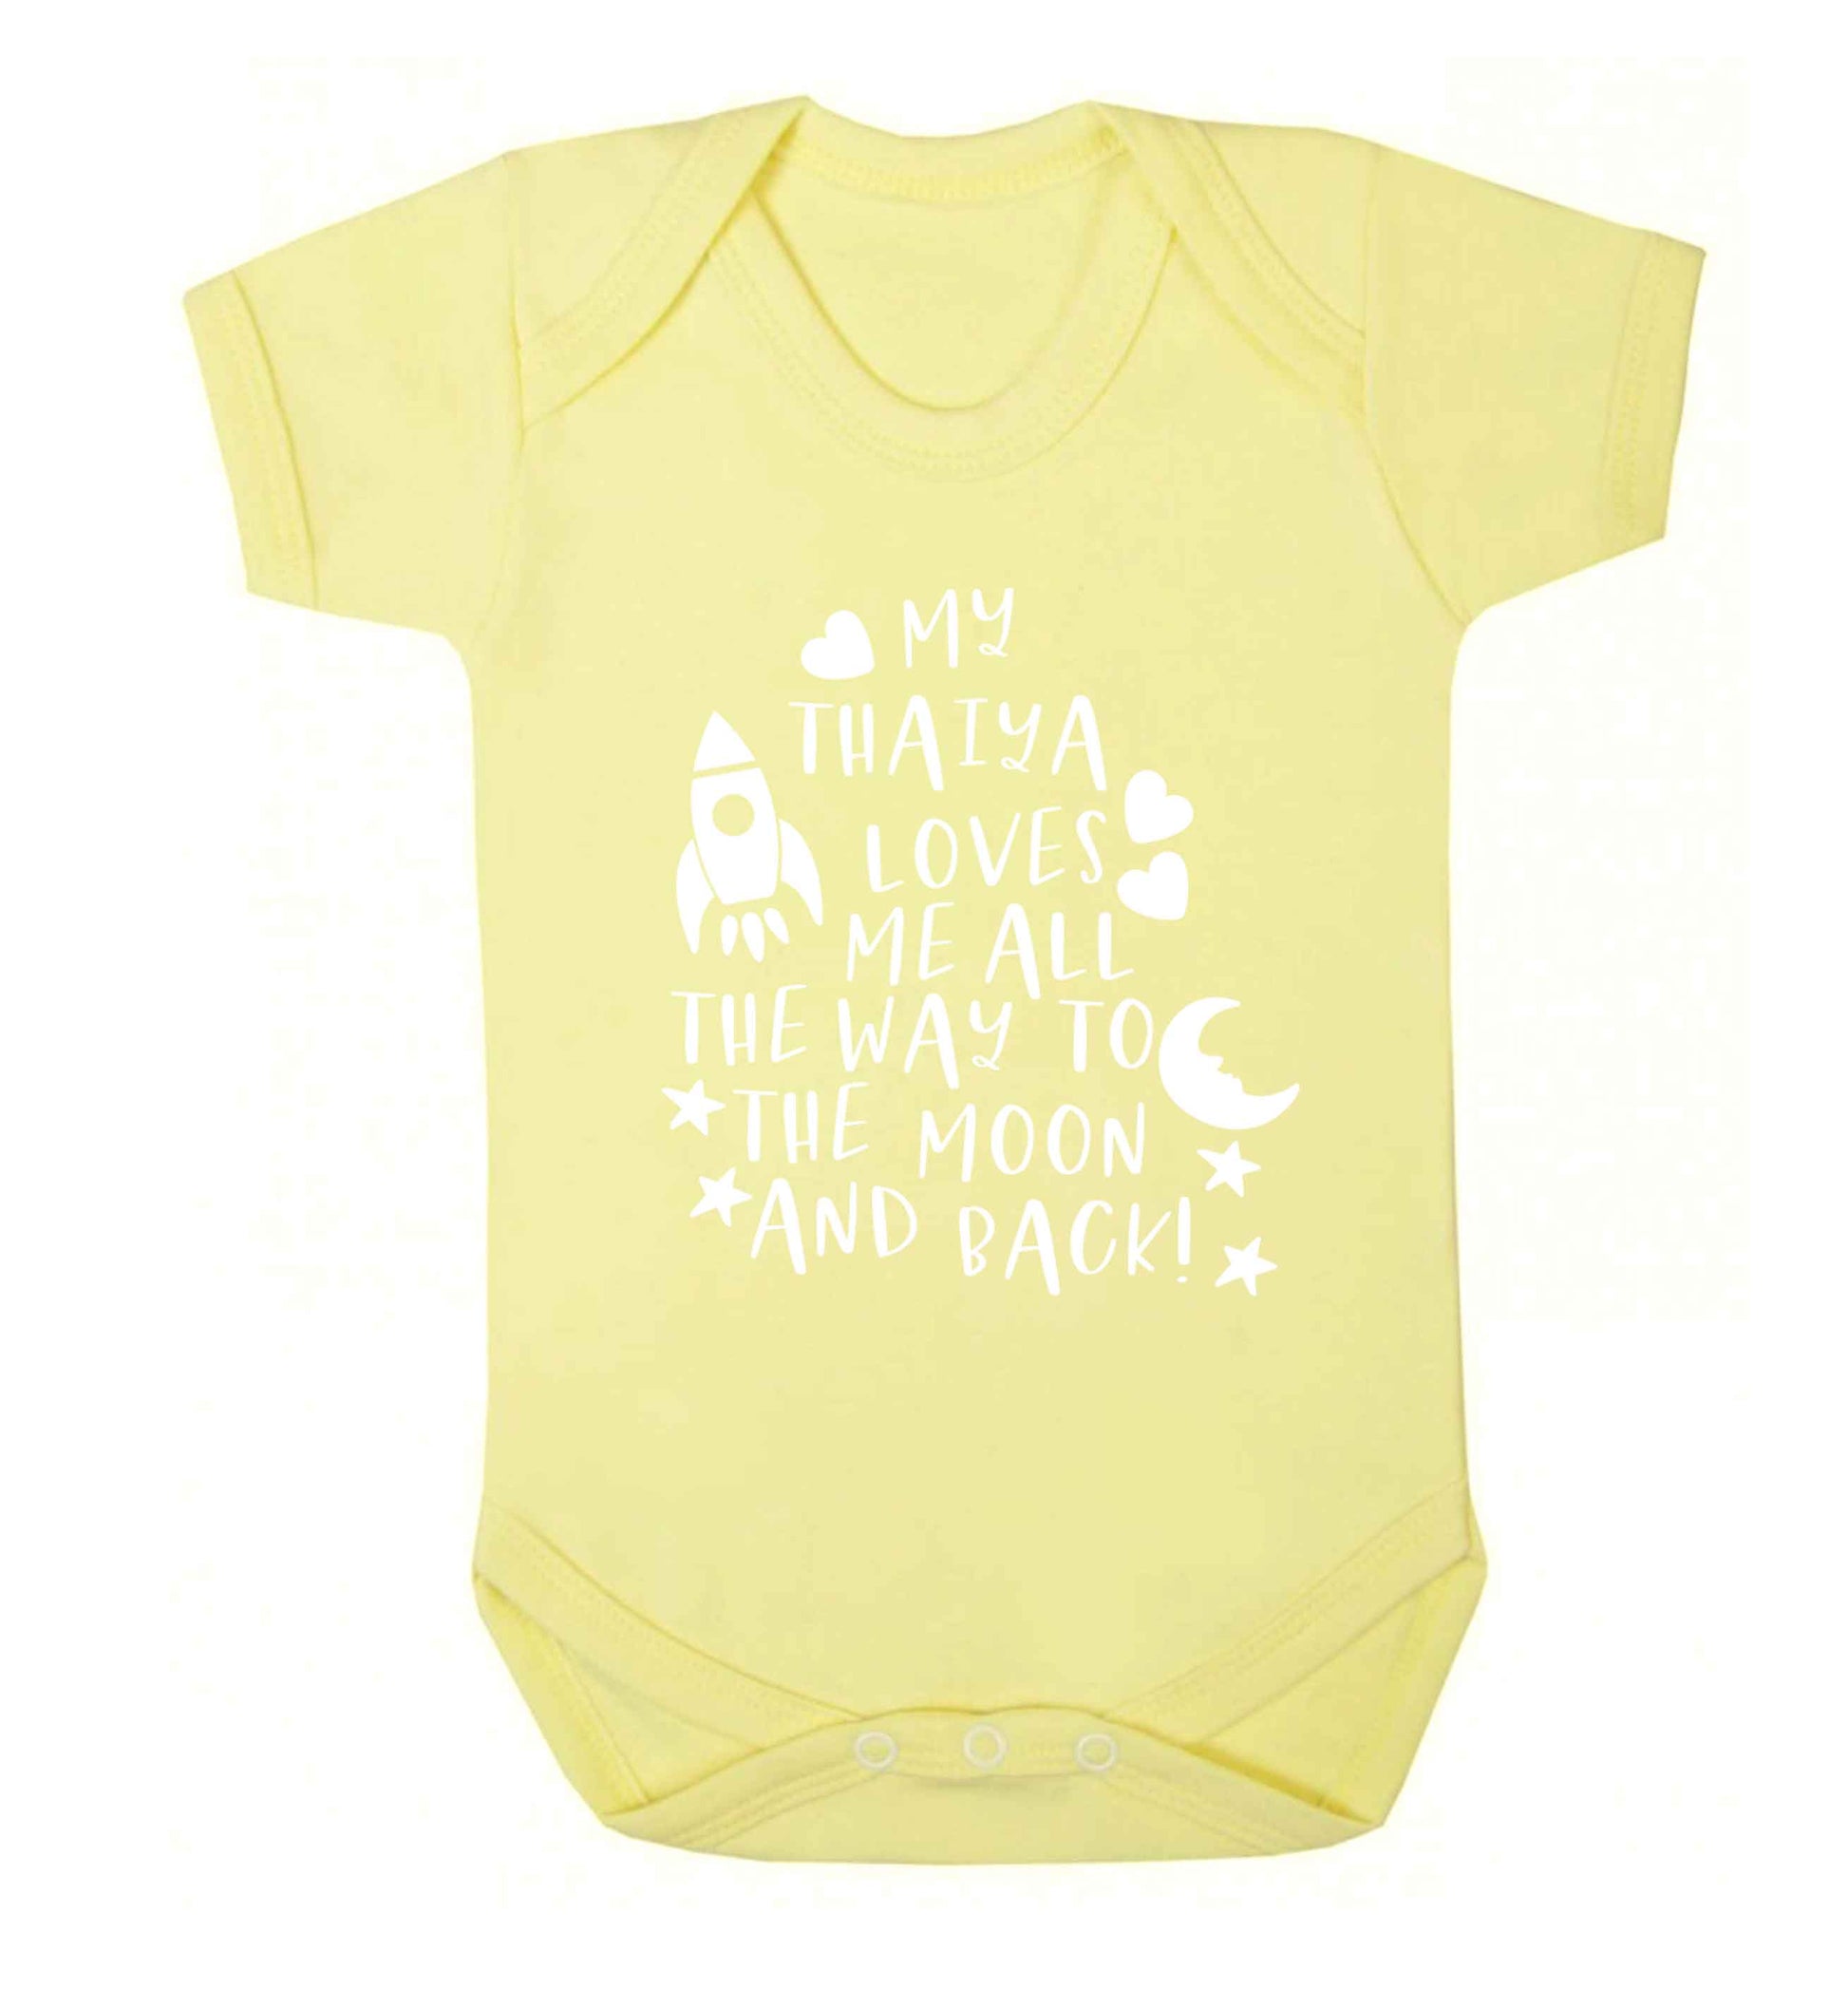 My thaiya loves me all the way to the moon and back Baby Vest pale yellow 18-24 months